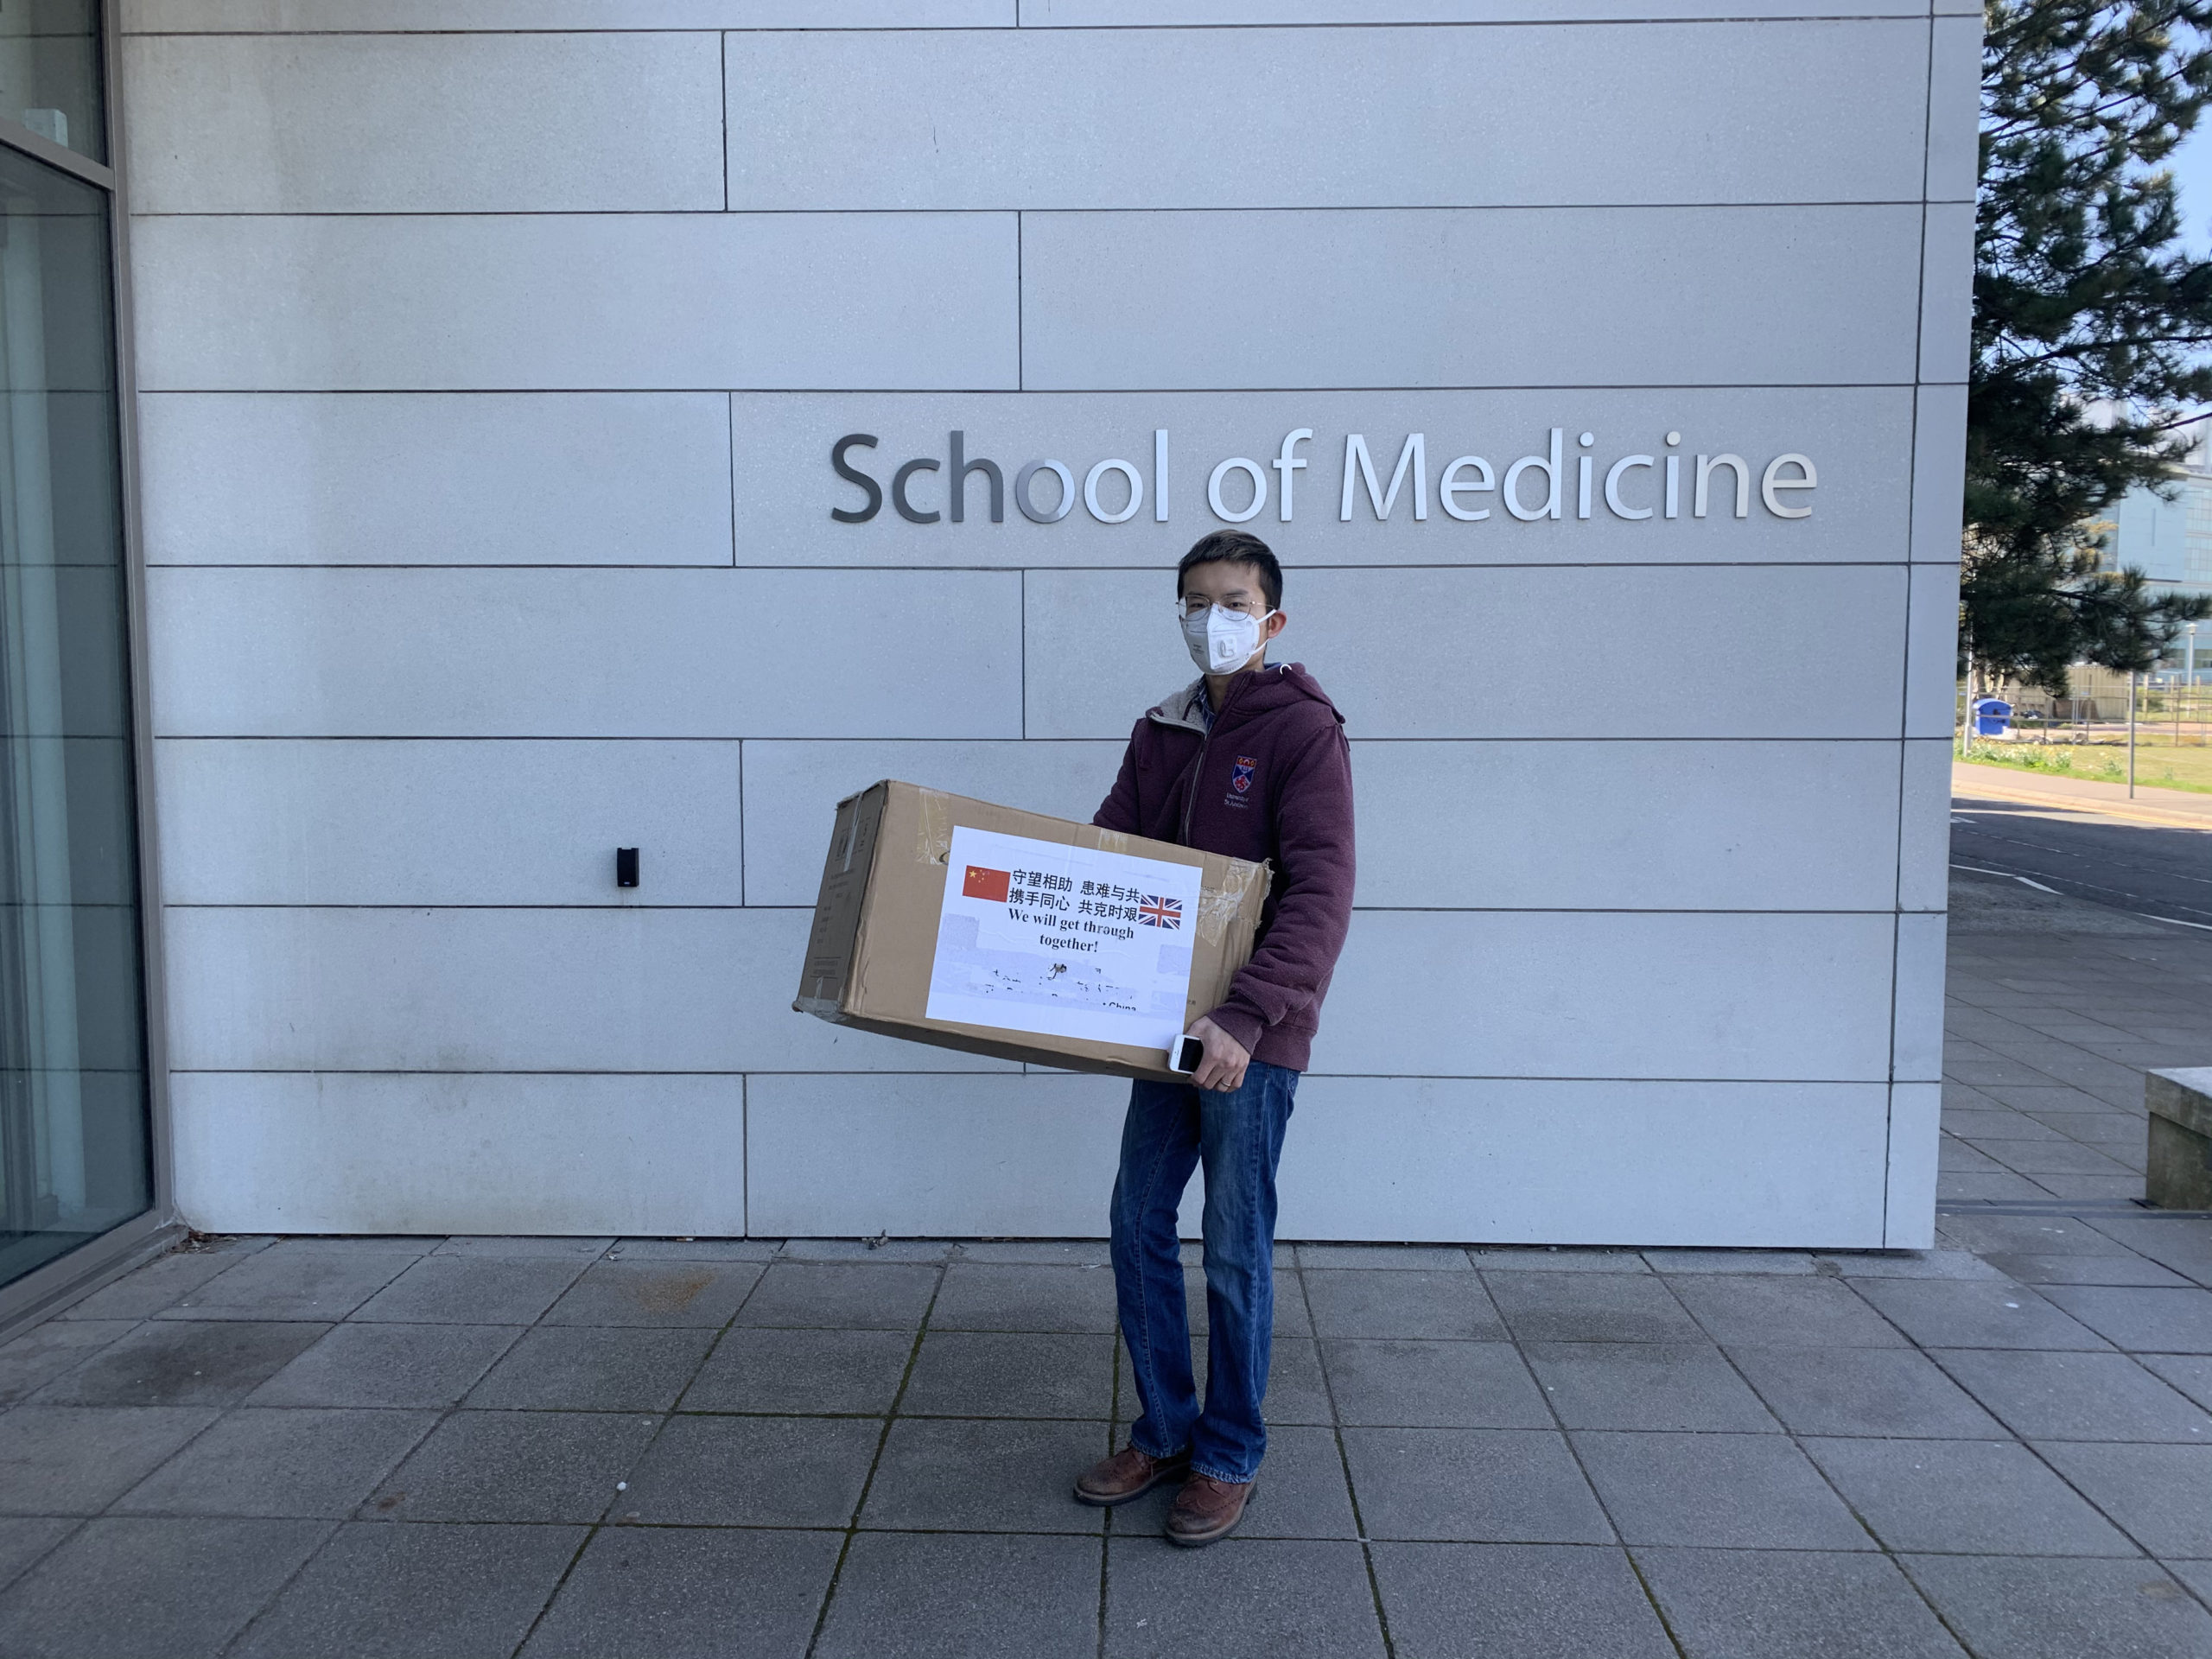 Student Liangfei Zhang dropping some of the equipment off at St Andrews School of Medicine.